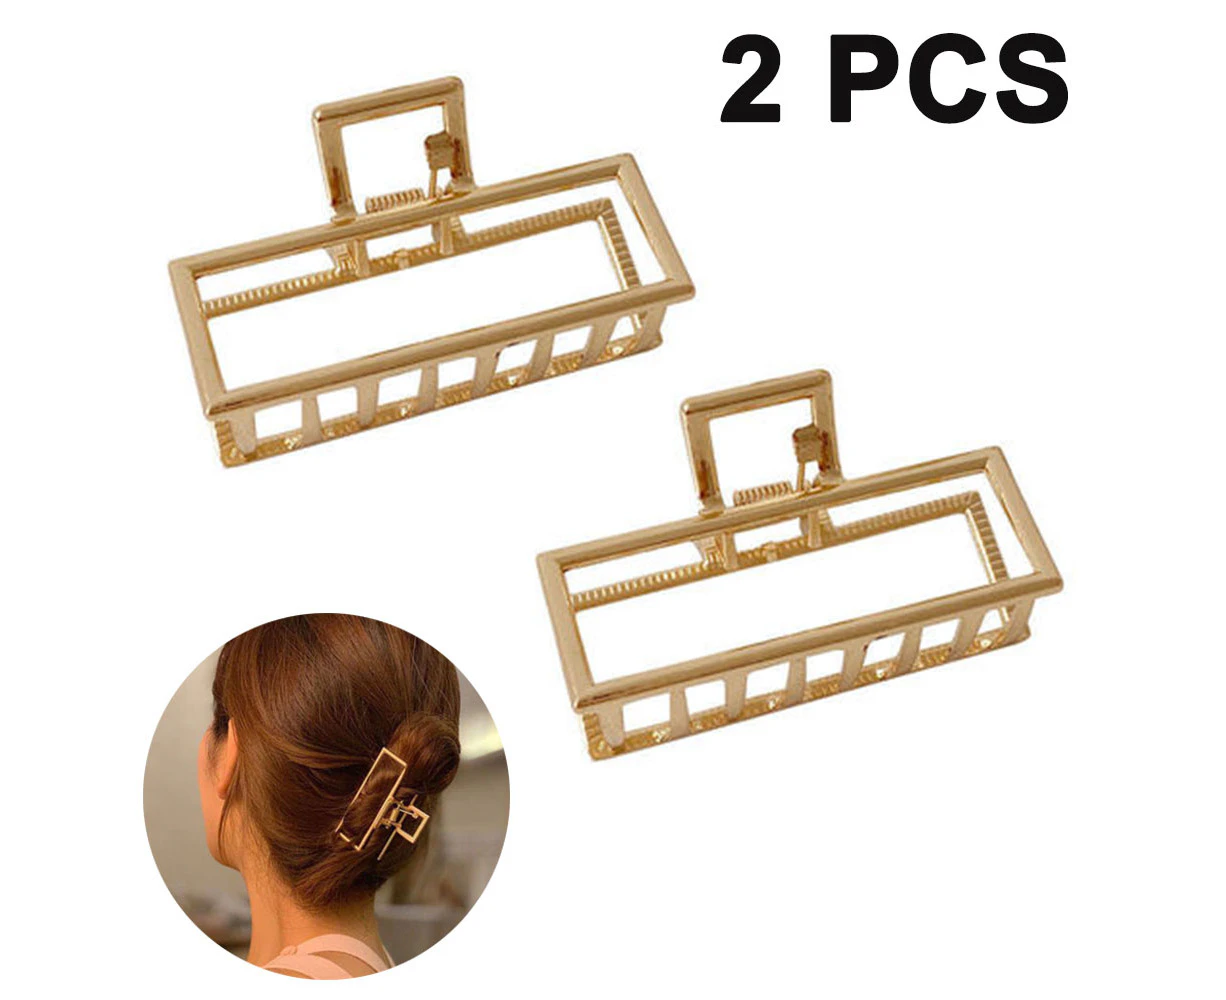 2PCS Metal claw clips, non-slip hair clips, hollow jaw hair clip for  flxing, fixed strong clips, retro hair clips, hair accessories for women,  girls - Style 1 .au